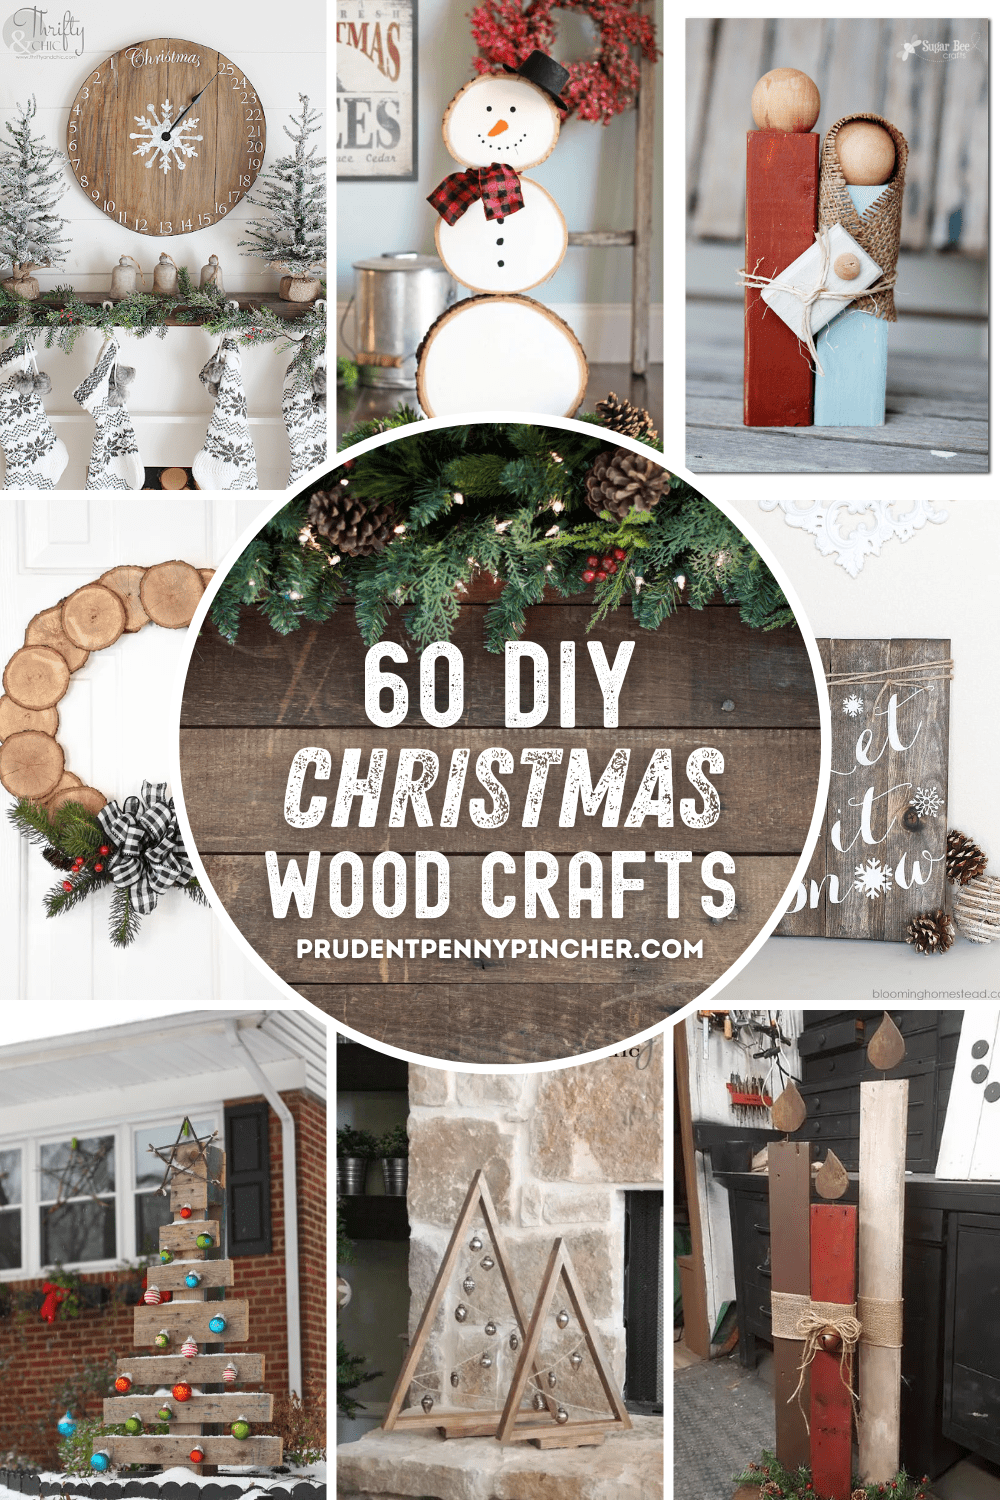 Reclaimed Wood Projects You're Going to Love - DIY Candy